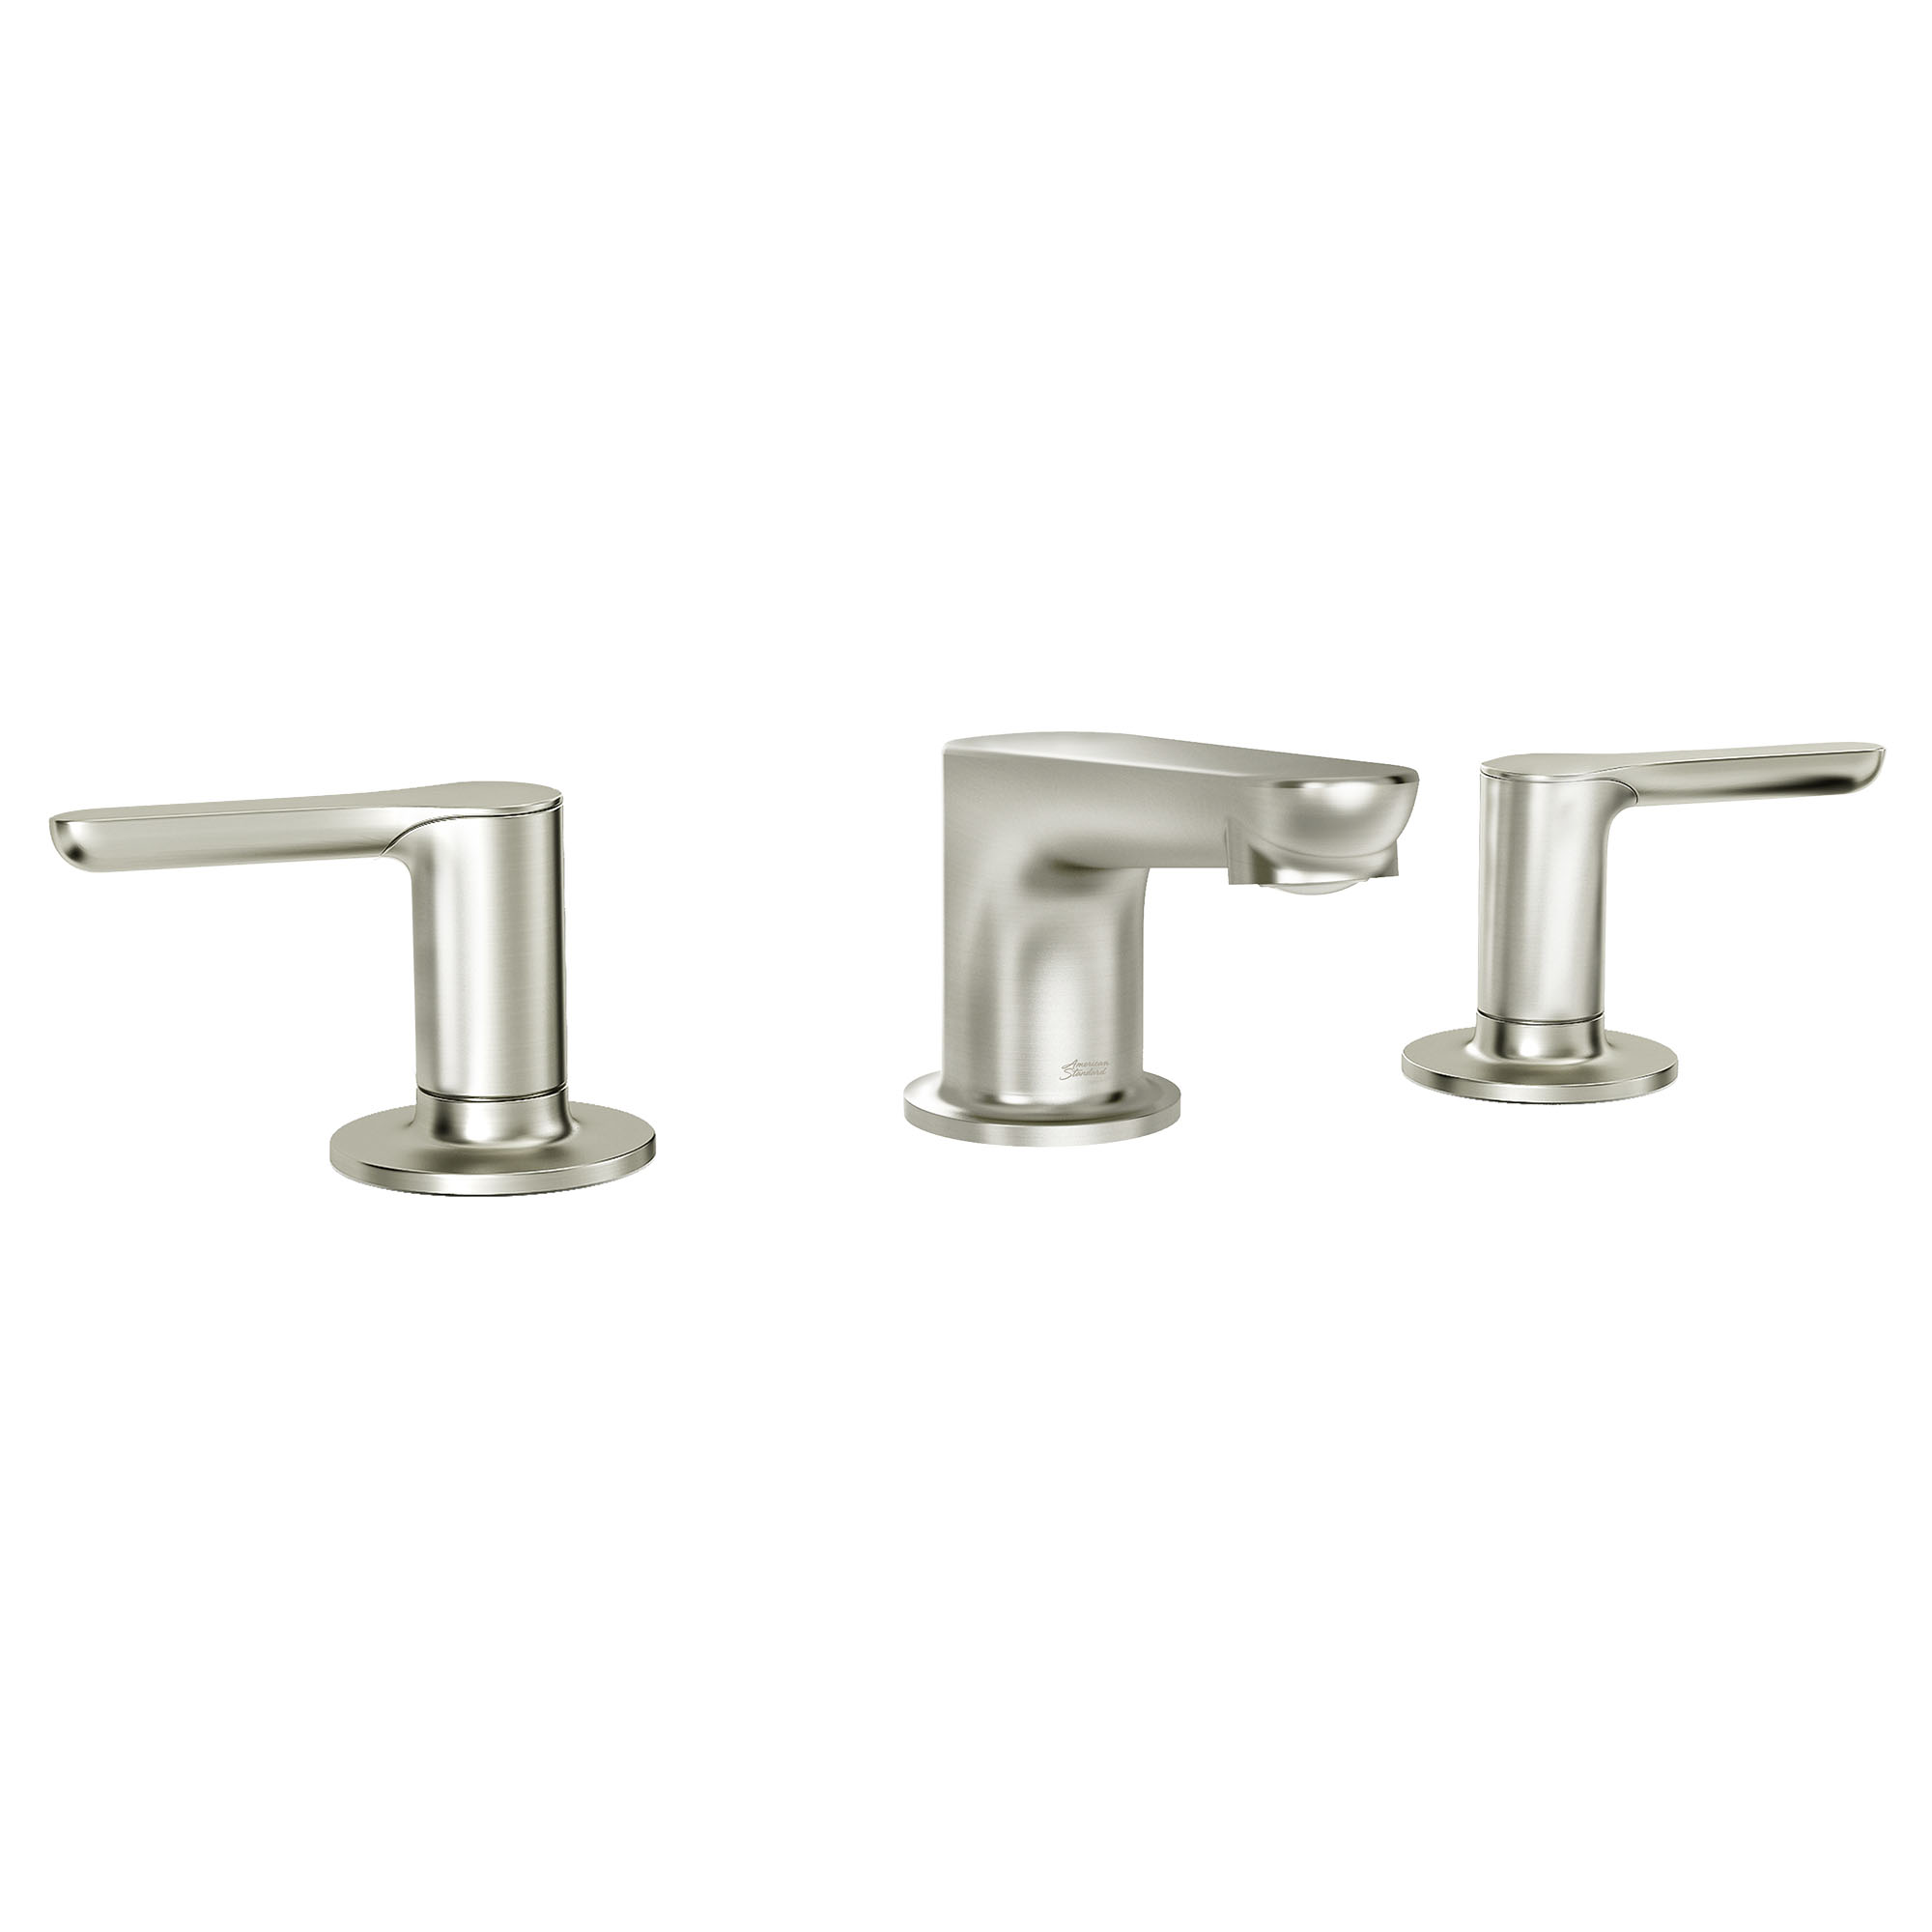 Studio™ S Widespread Low Spout Lever Handles 1.2 gpm/4.5 L/min With Lever Handles